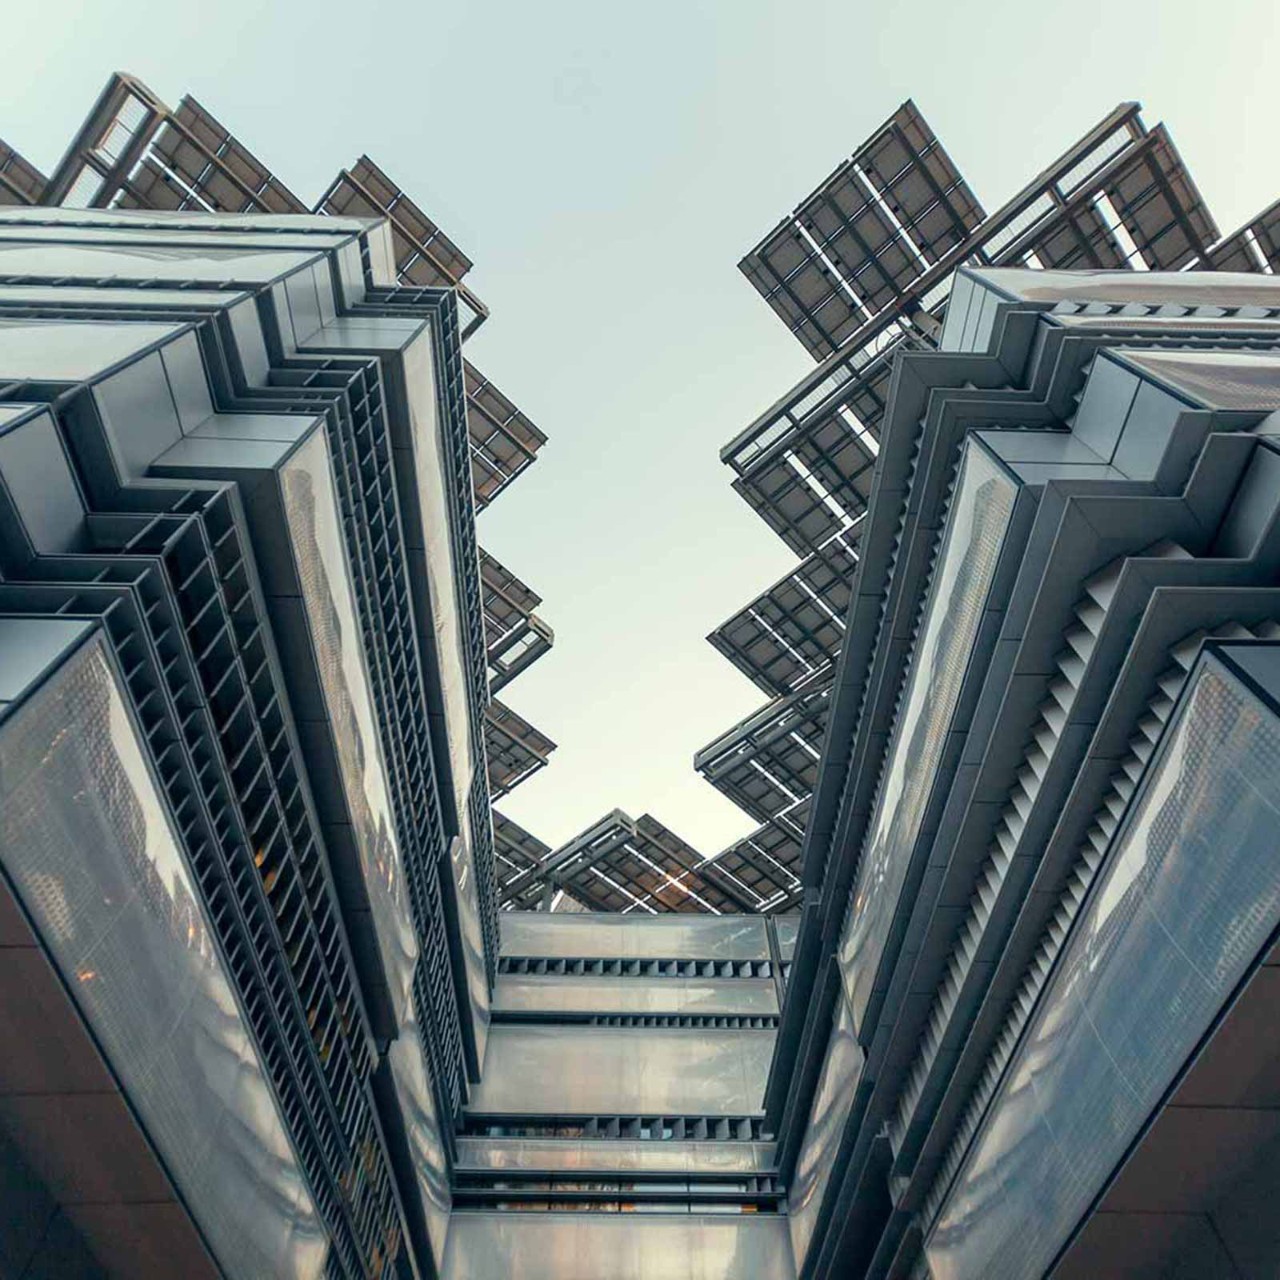 Solar panels on a rooftop in Masdar City